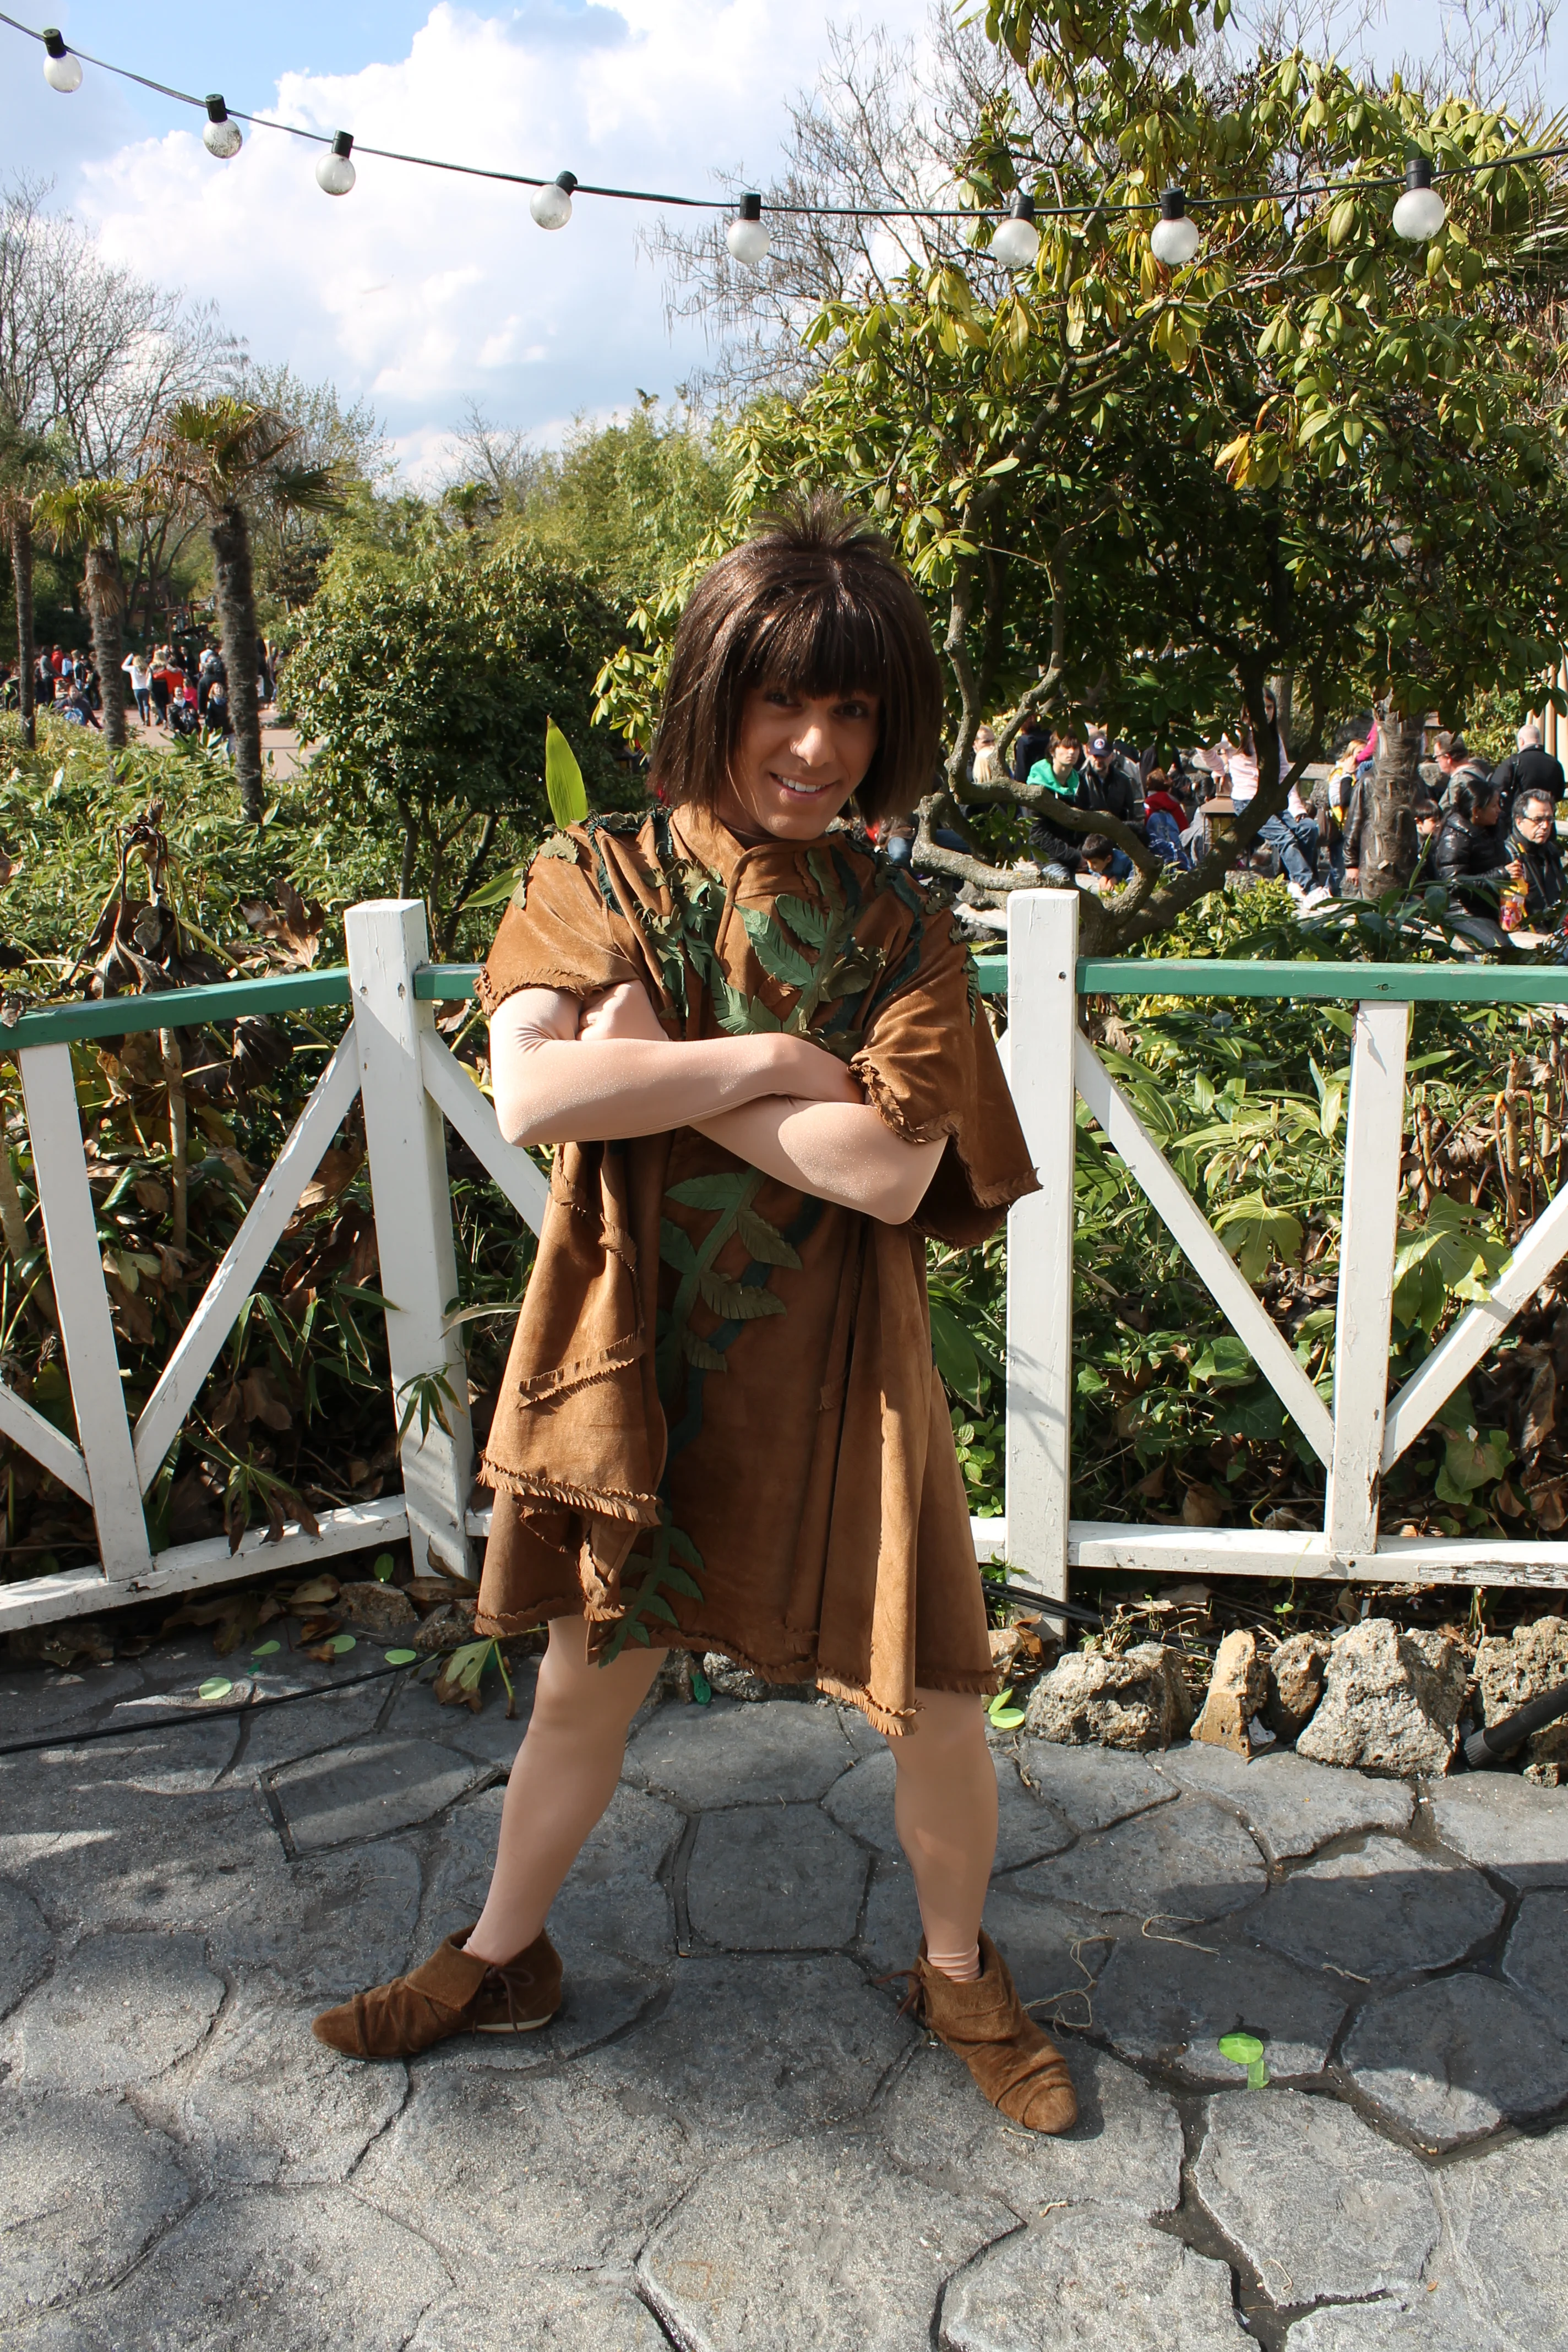 Mowgli made a rare appereance after a small show with him in it on April 12th 2012, you can't find him normally at the Parks